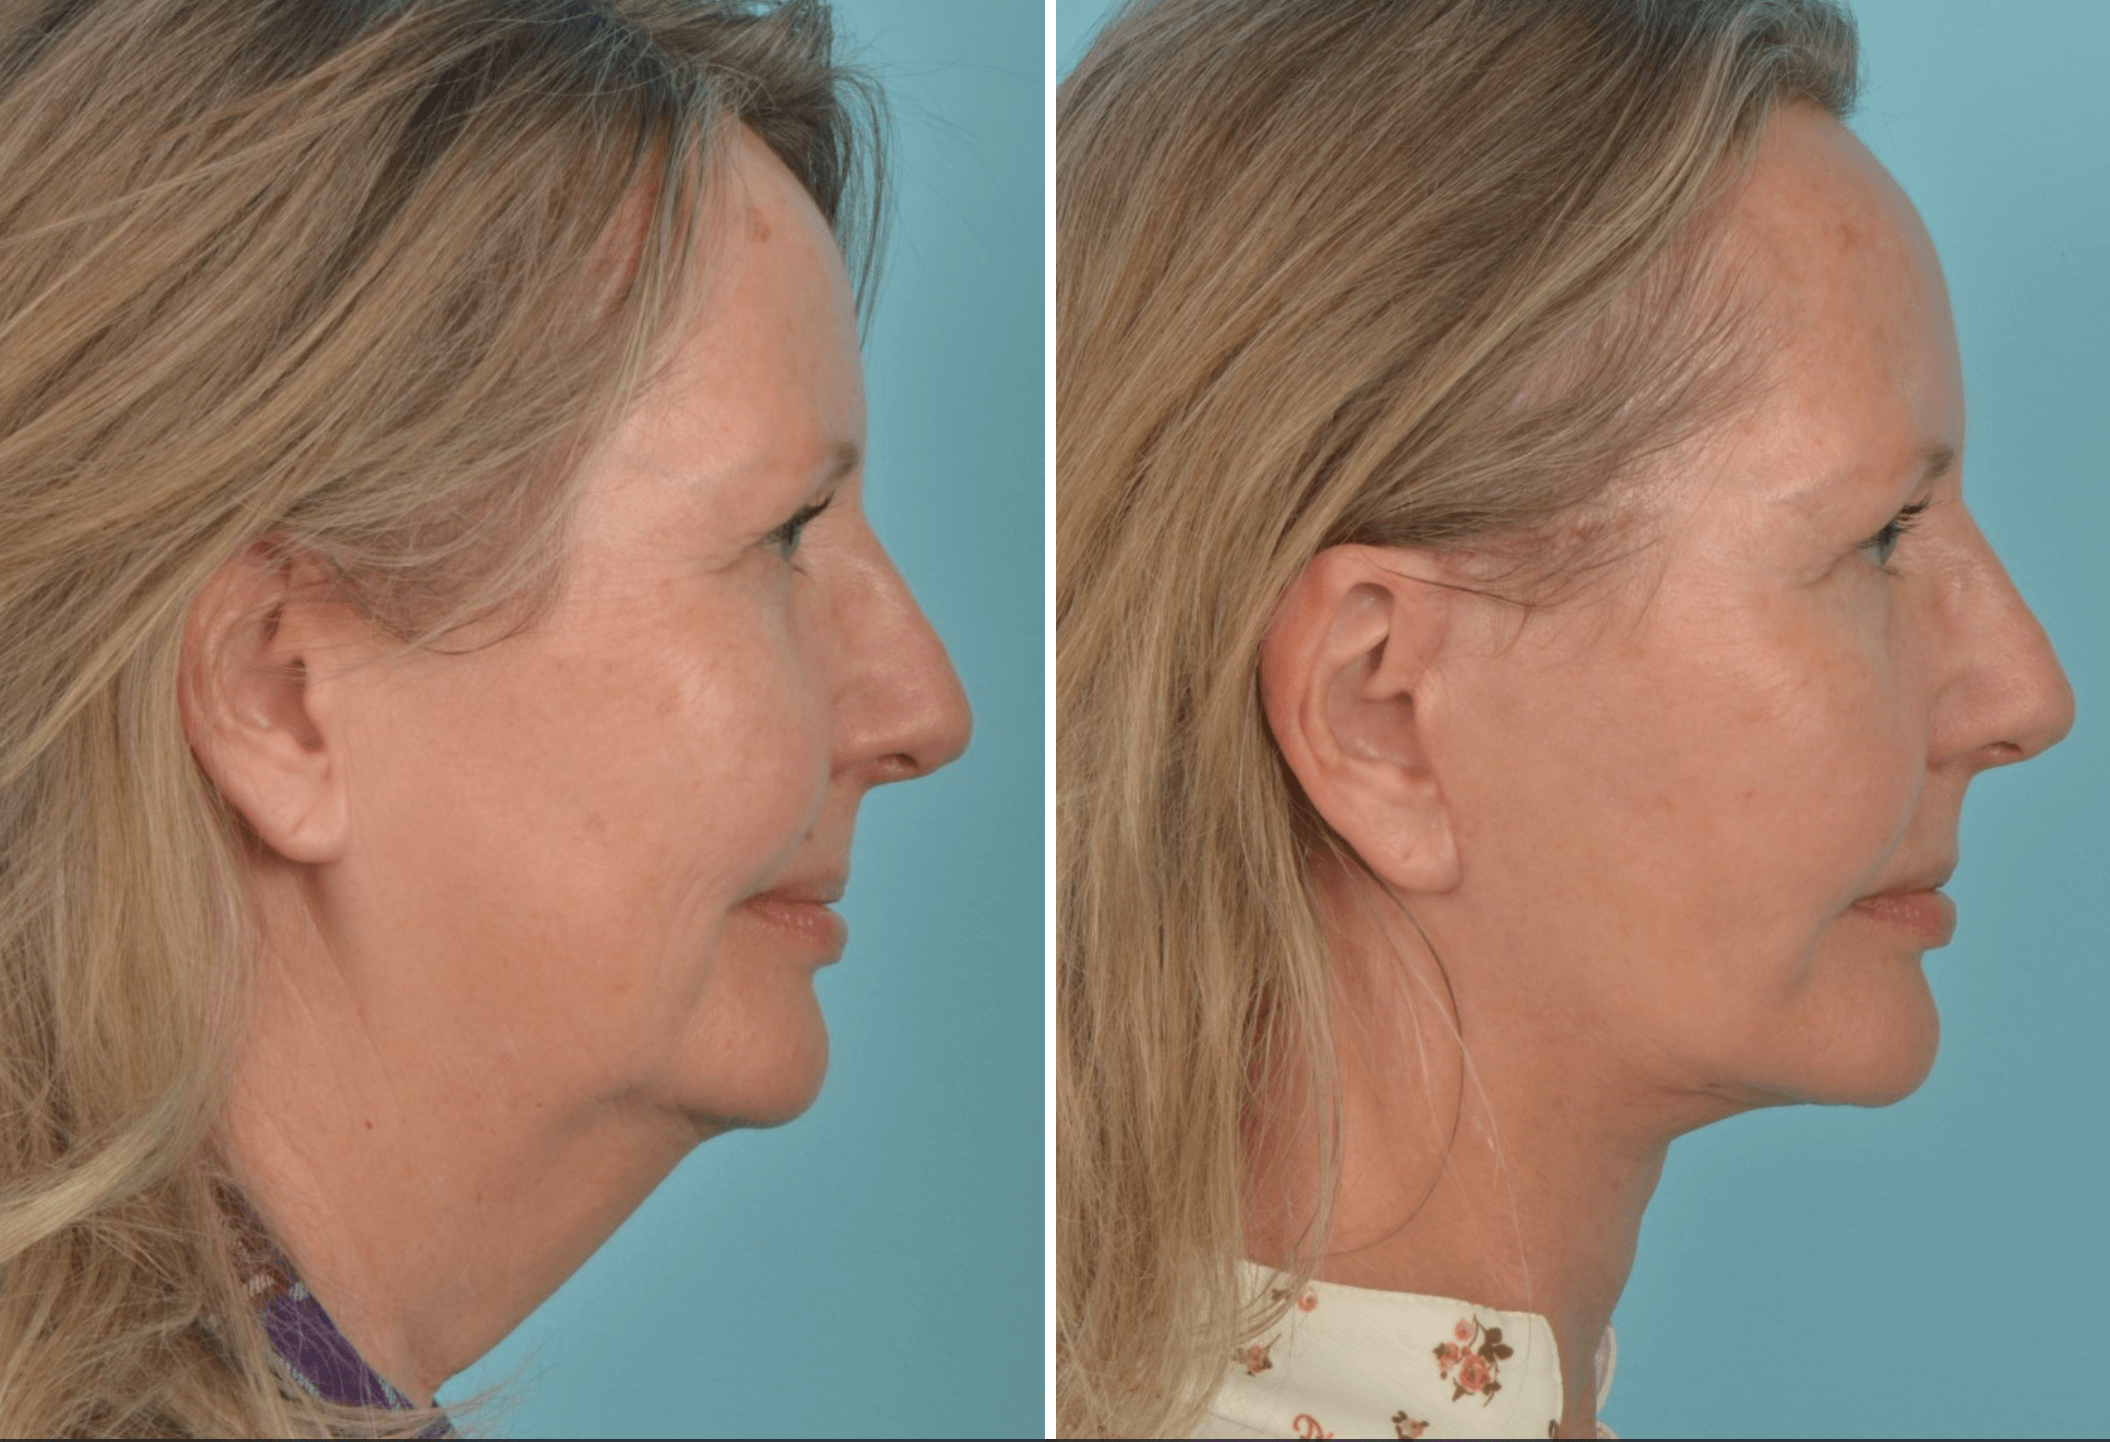 Neck Lift (Platysmaplasty): Surgery, Recovery & What to Expect